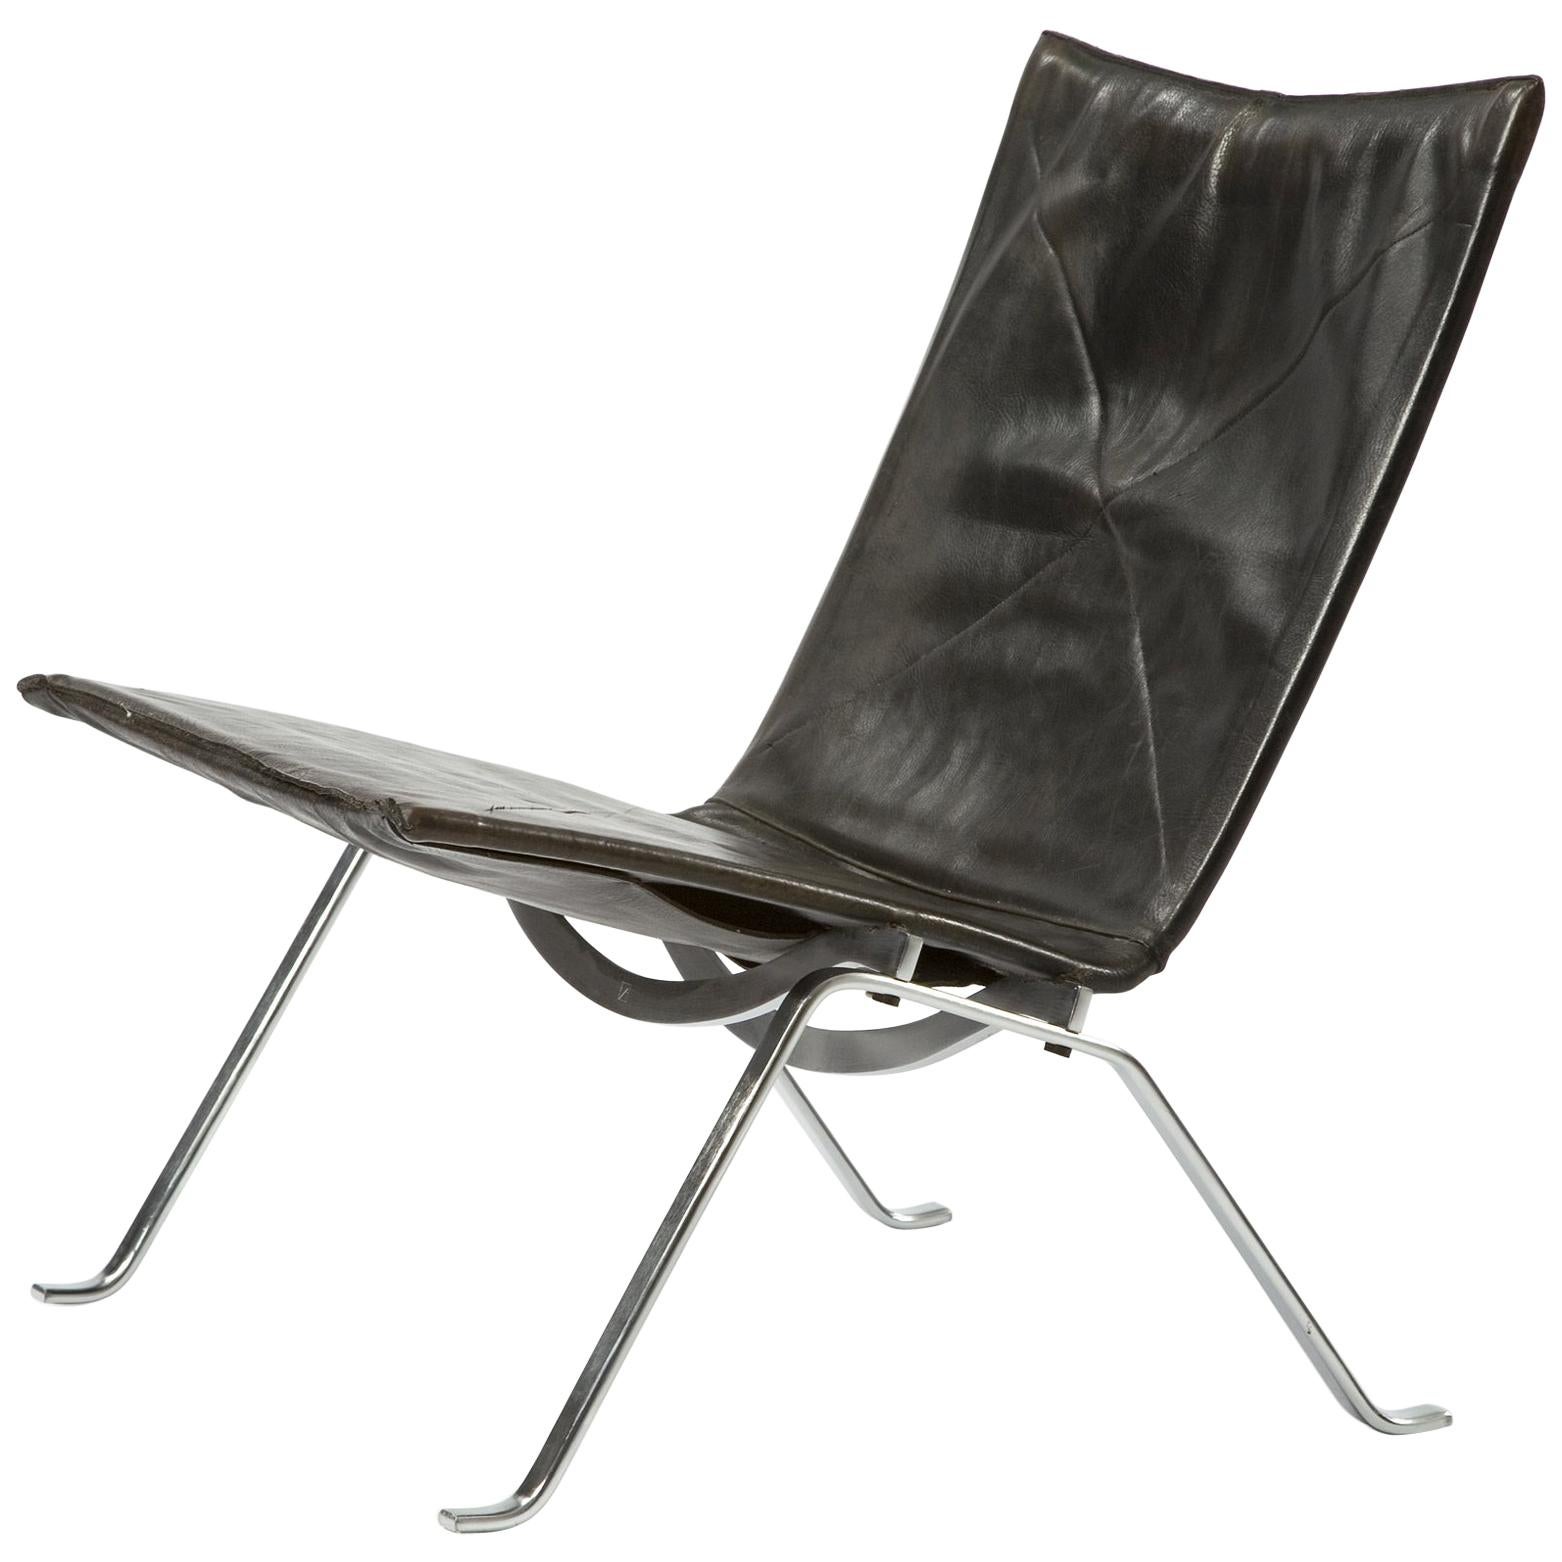 PK 22 Lounge Chair in Steel and Black Leather by Poul Kjaerholm, circa 1956